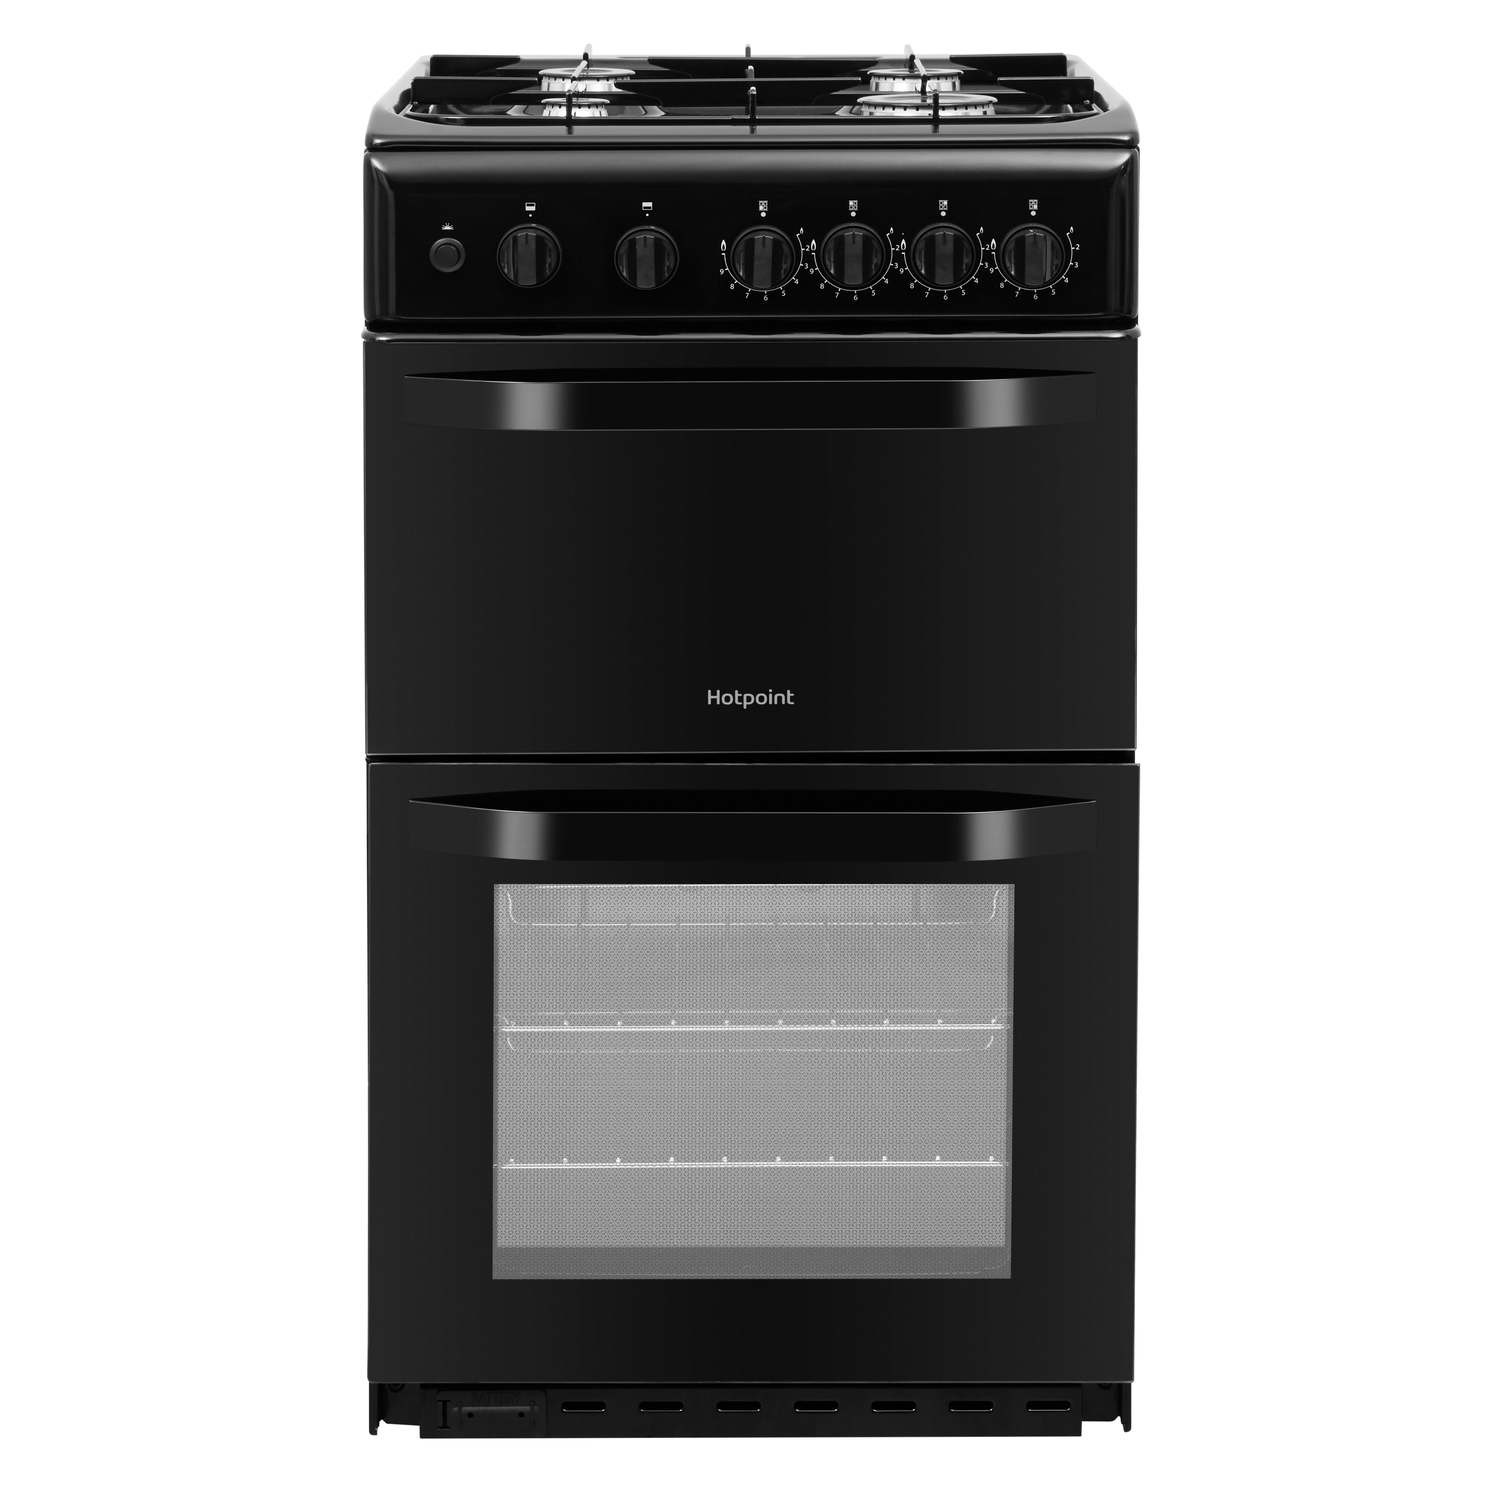 Hotpoint 50cm Double Cavity Gas Cooker - Black